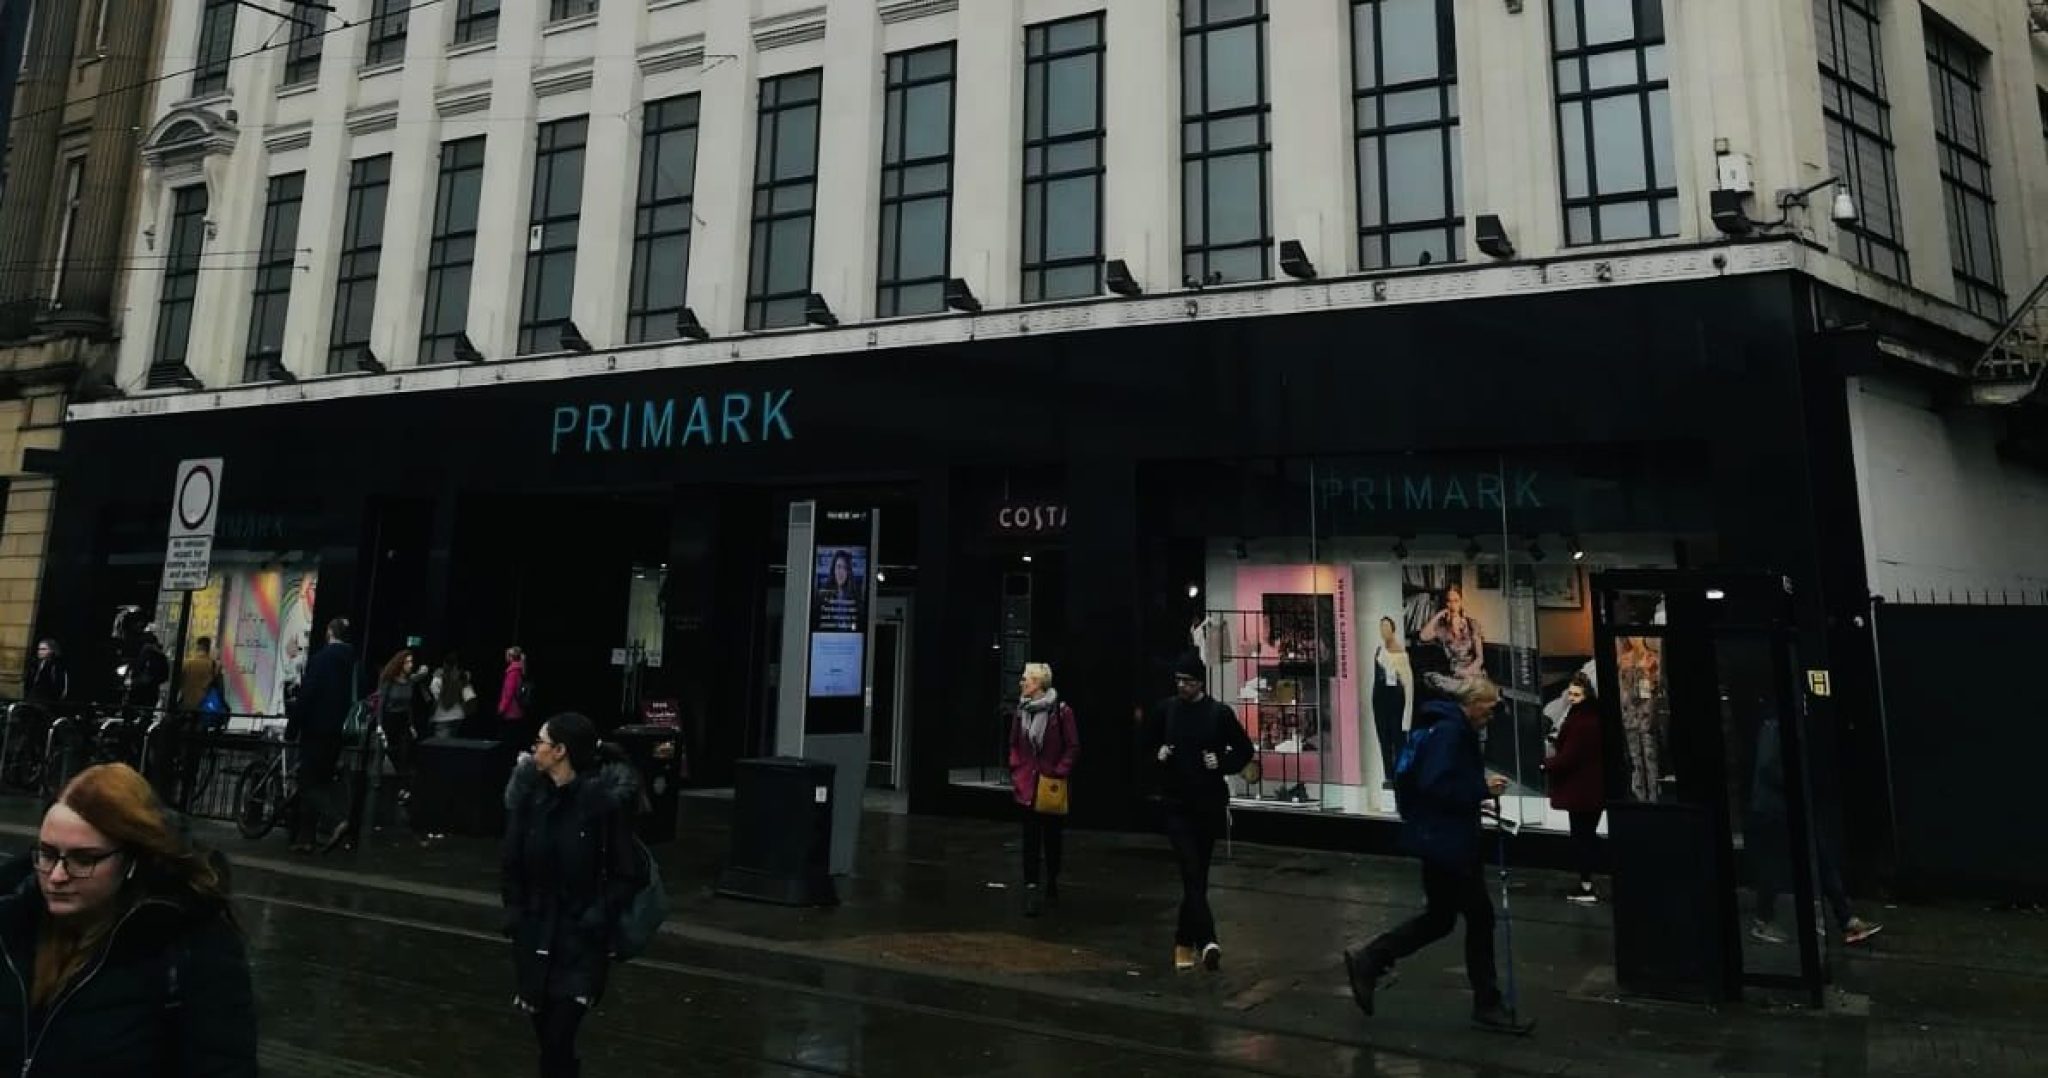 Primark unveils first sustainability and ethics progress report